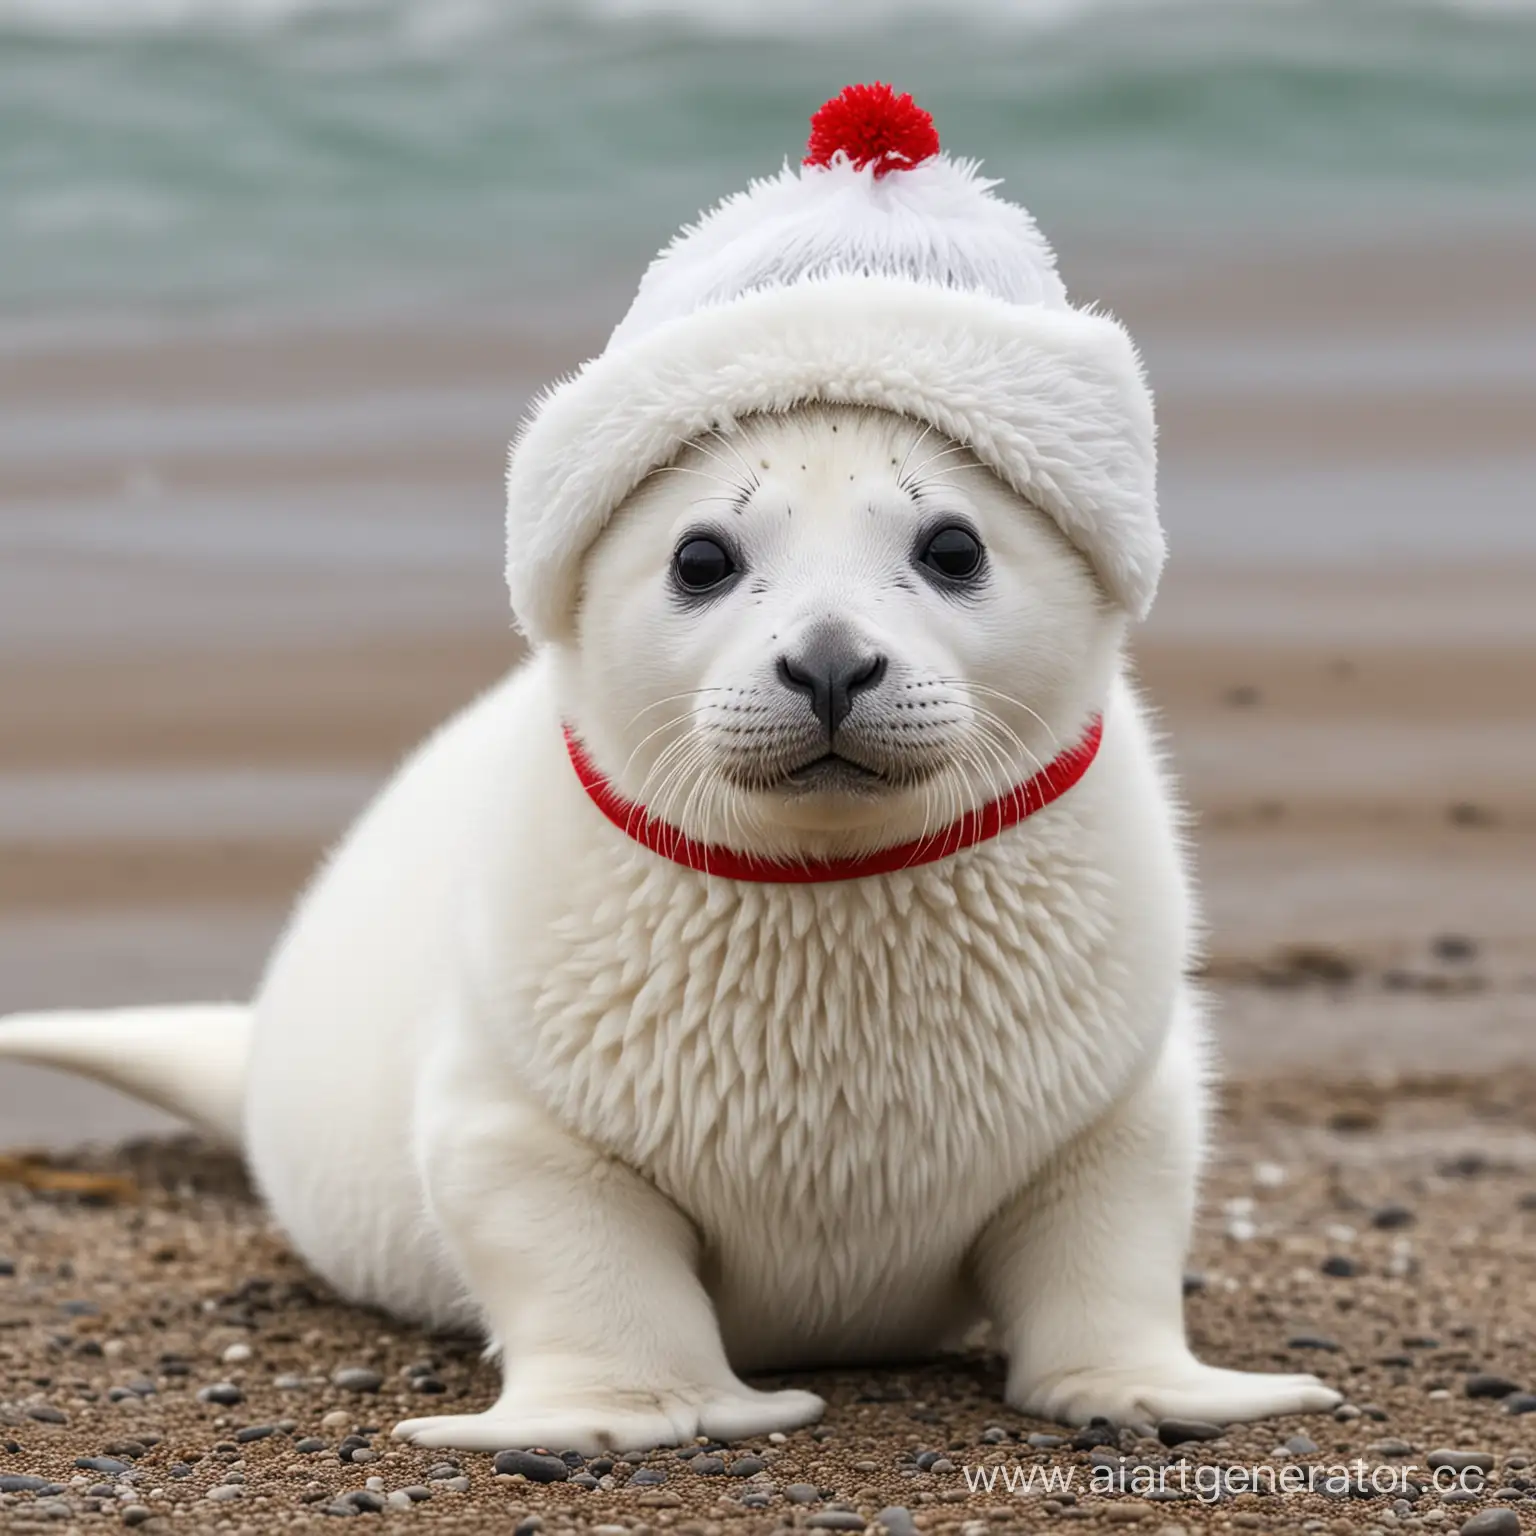 Adorable-White-Seal-Cub-Wearing-Red-Hat